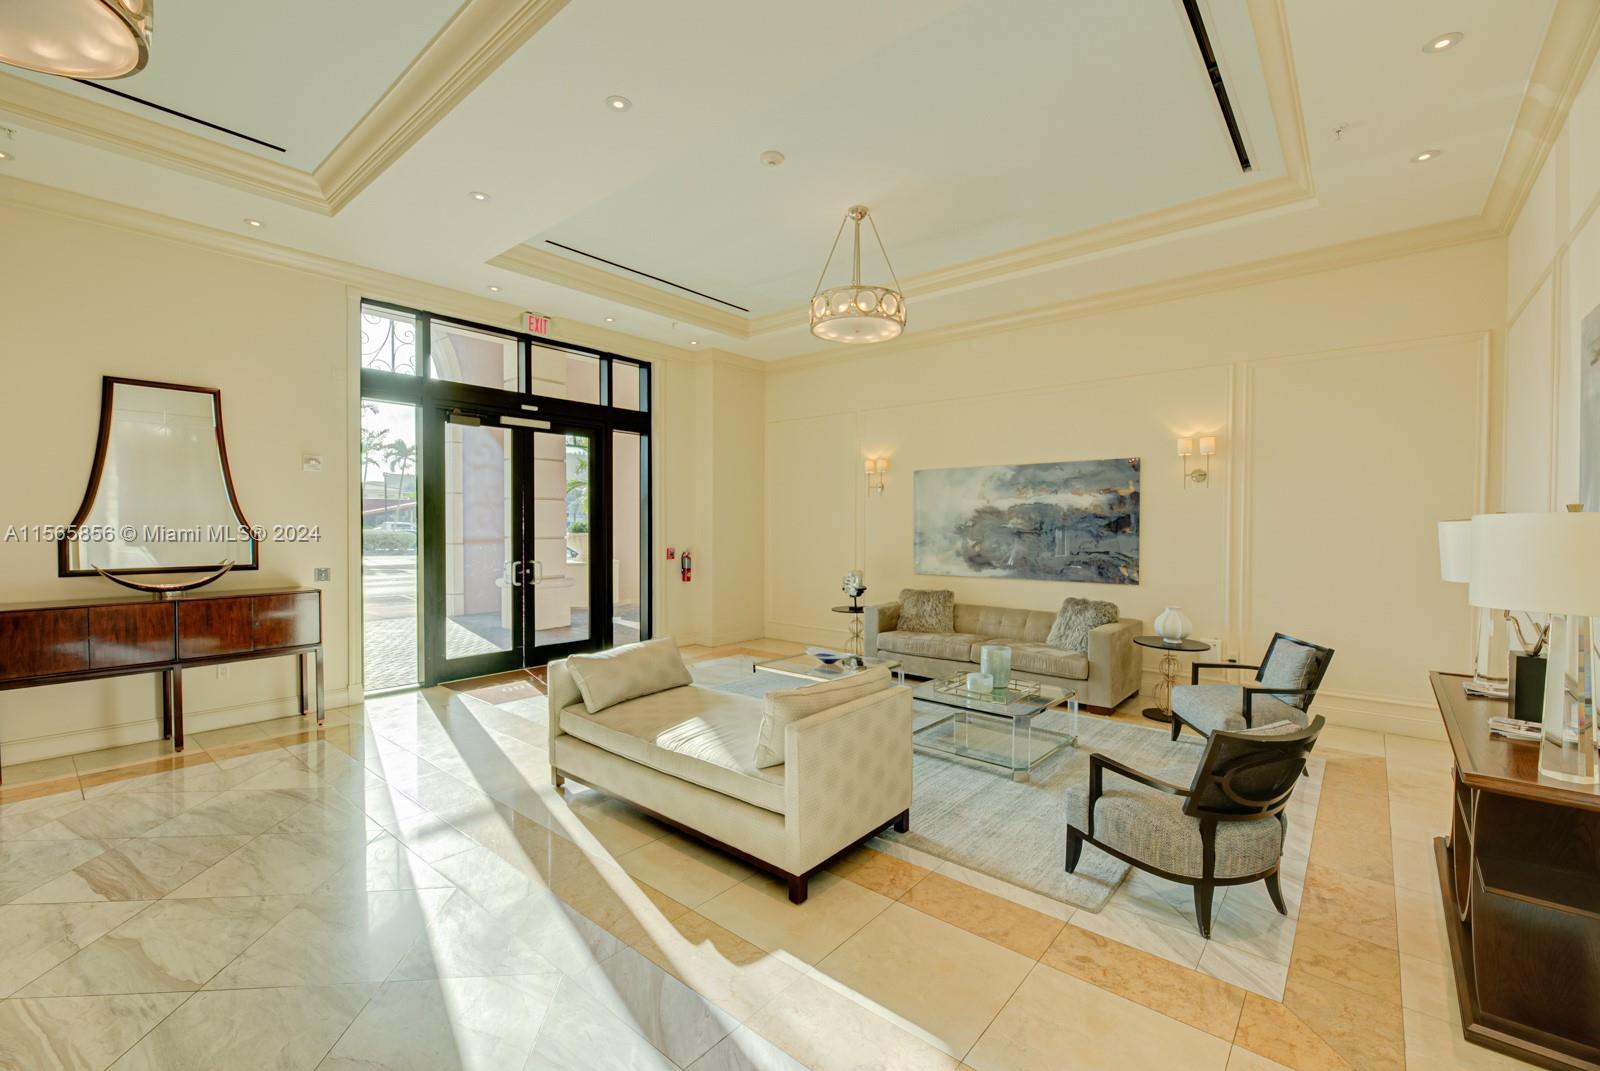 Introducing this spacious condo located in the heart of Coral Gables, offering the perfect blend of luxury and convenience w/spectacular views. This spacious (924 s/f), 1 bedroom, plus den unit features 1.5 baths, providing ample space for comfortable living. The den provides versatility and can be used as a home office, guest room, or additional living space. Residents of this exceptional condo will have access to 24/7 security, fitness center, swimming pool, and secured parking. Features include Italian cabinetry, granite countertops, stainless steel appliances, marble throughout bathrooms, impact windows, and one assigned parking space. Washer & dryer in unit. Either walk or take the trolley to Miracle Mile for great restaurants, shopping & art galleries. A MUST SEE!